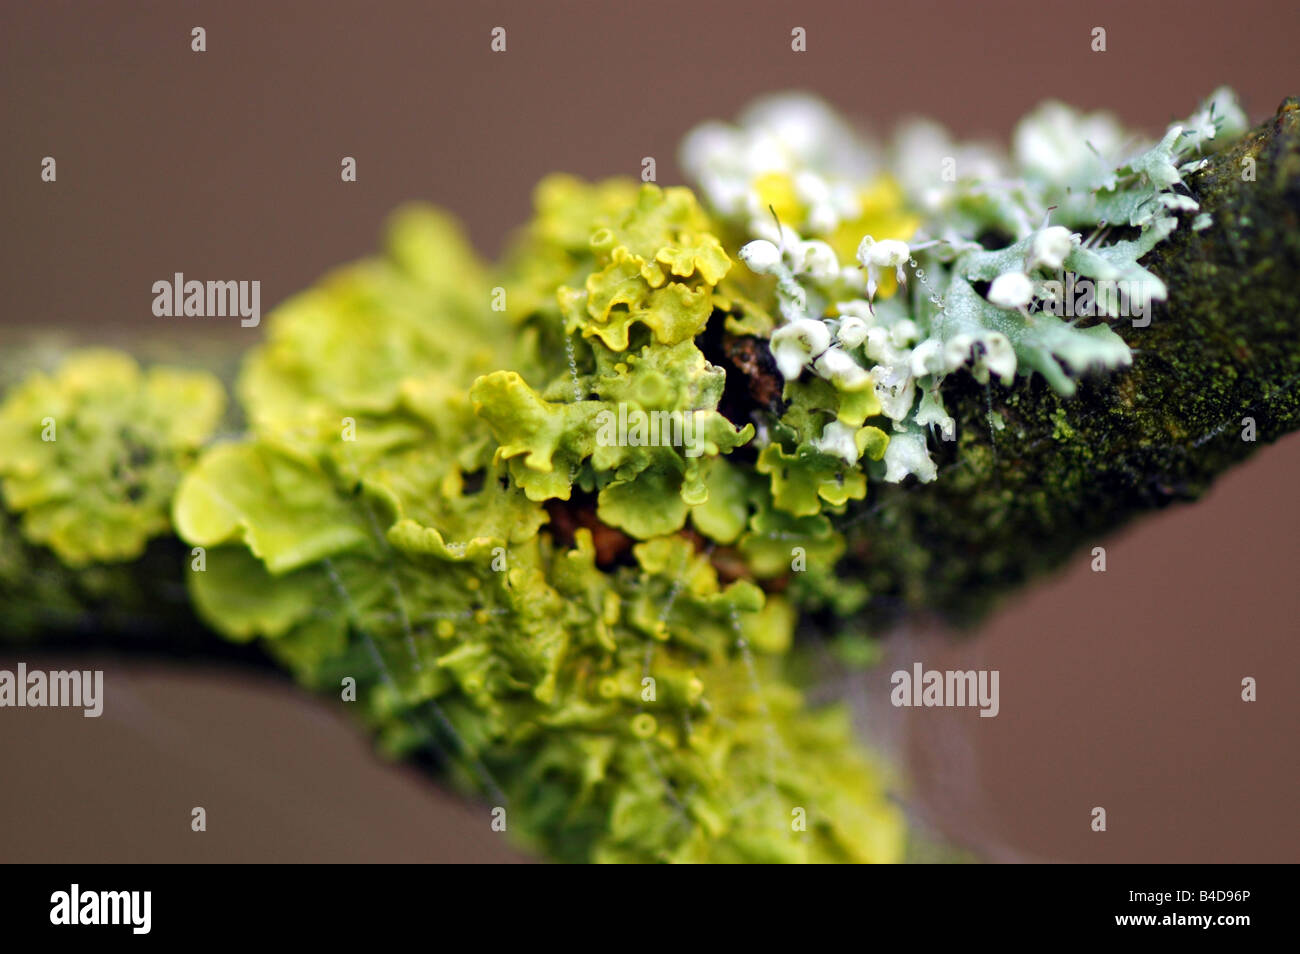 Lichen growing on a tree branch Stock Photo